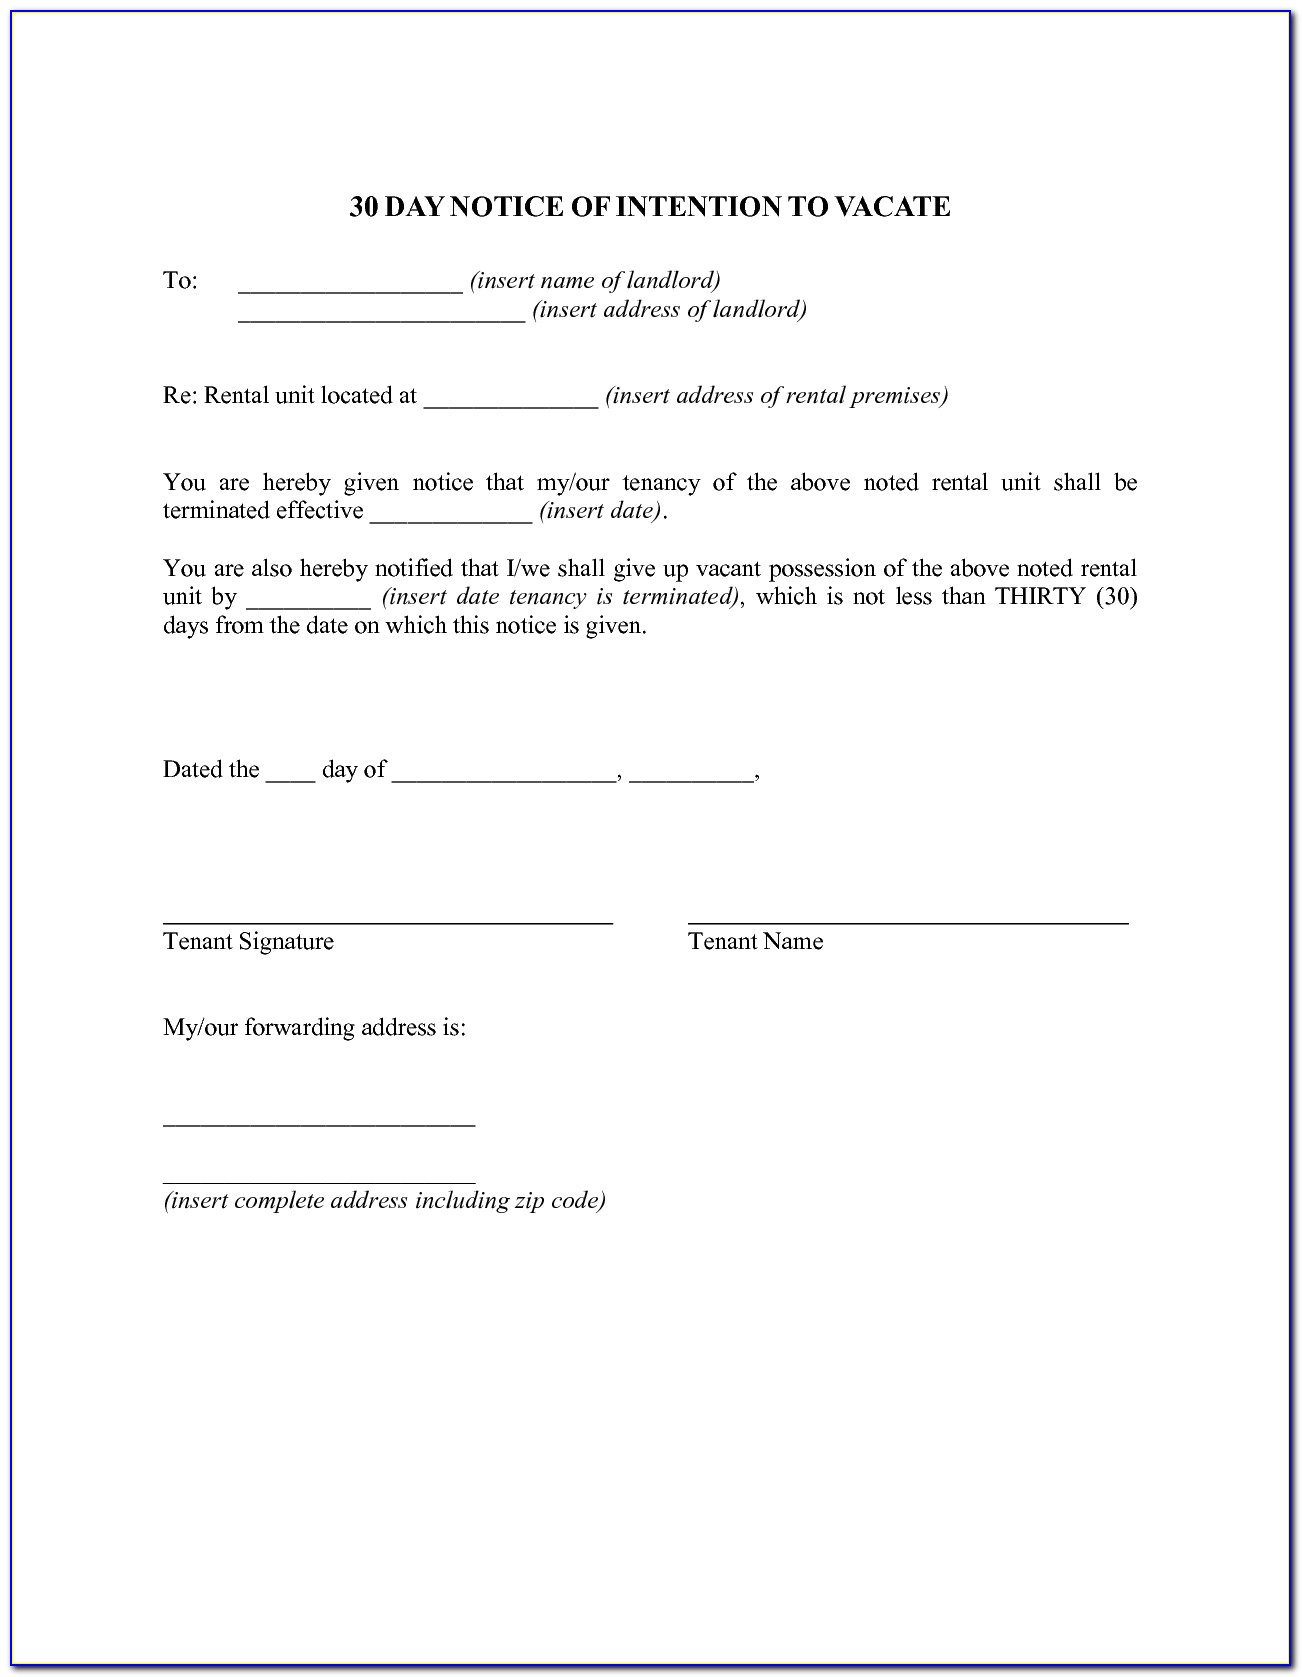 landlord-30-day-notice-to-vacate-form-form-resume-examples-evkbavbo2d